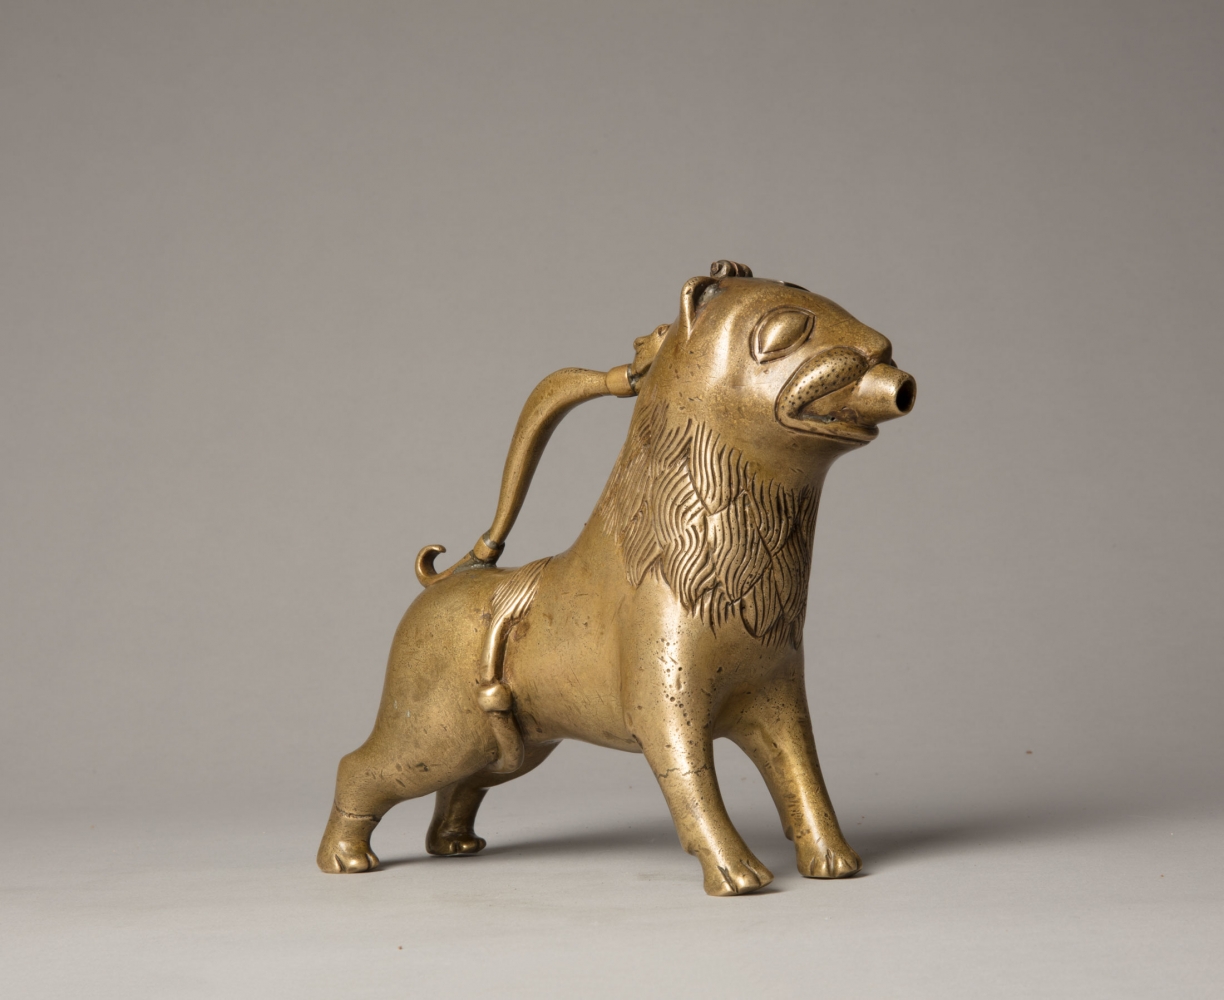 An aquamanile in the form of a lion, Early 13th century